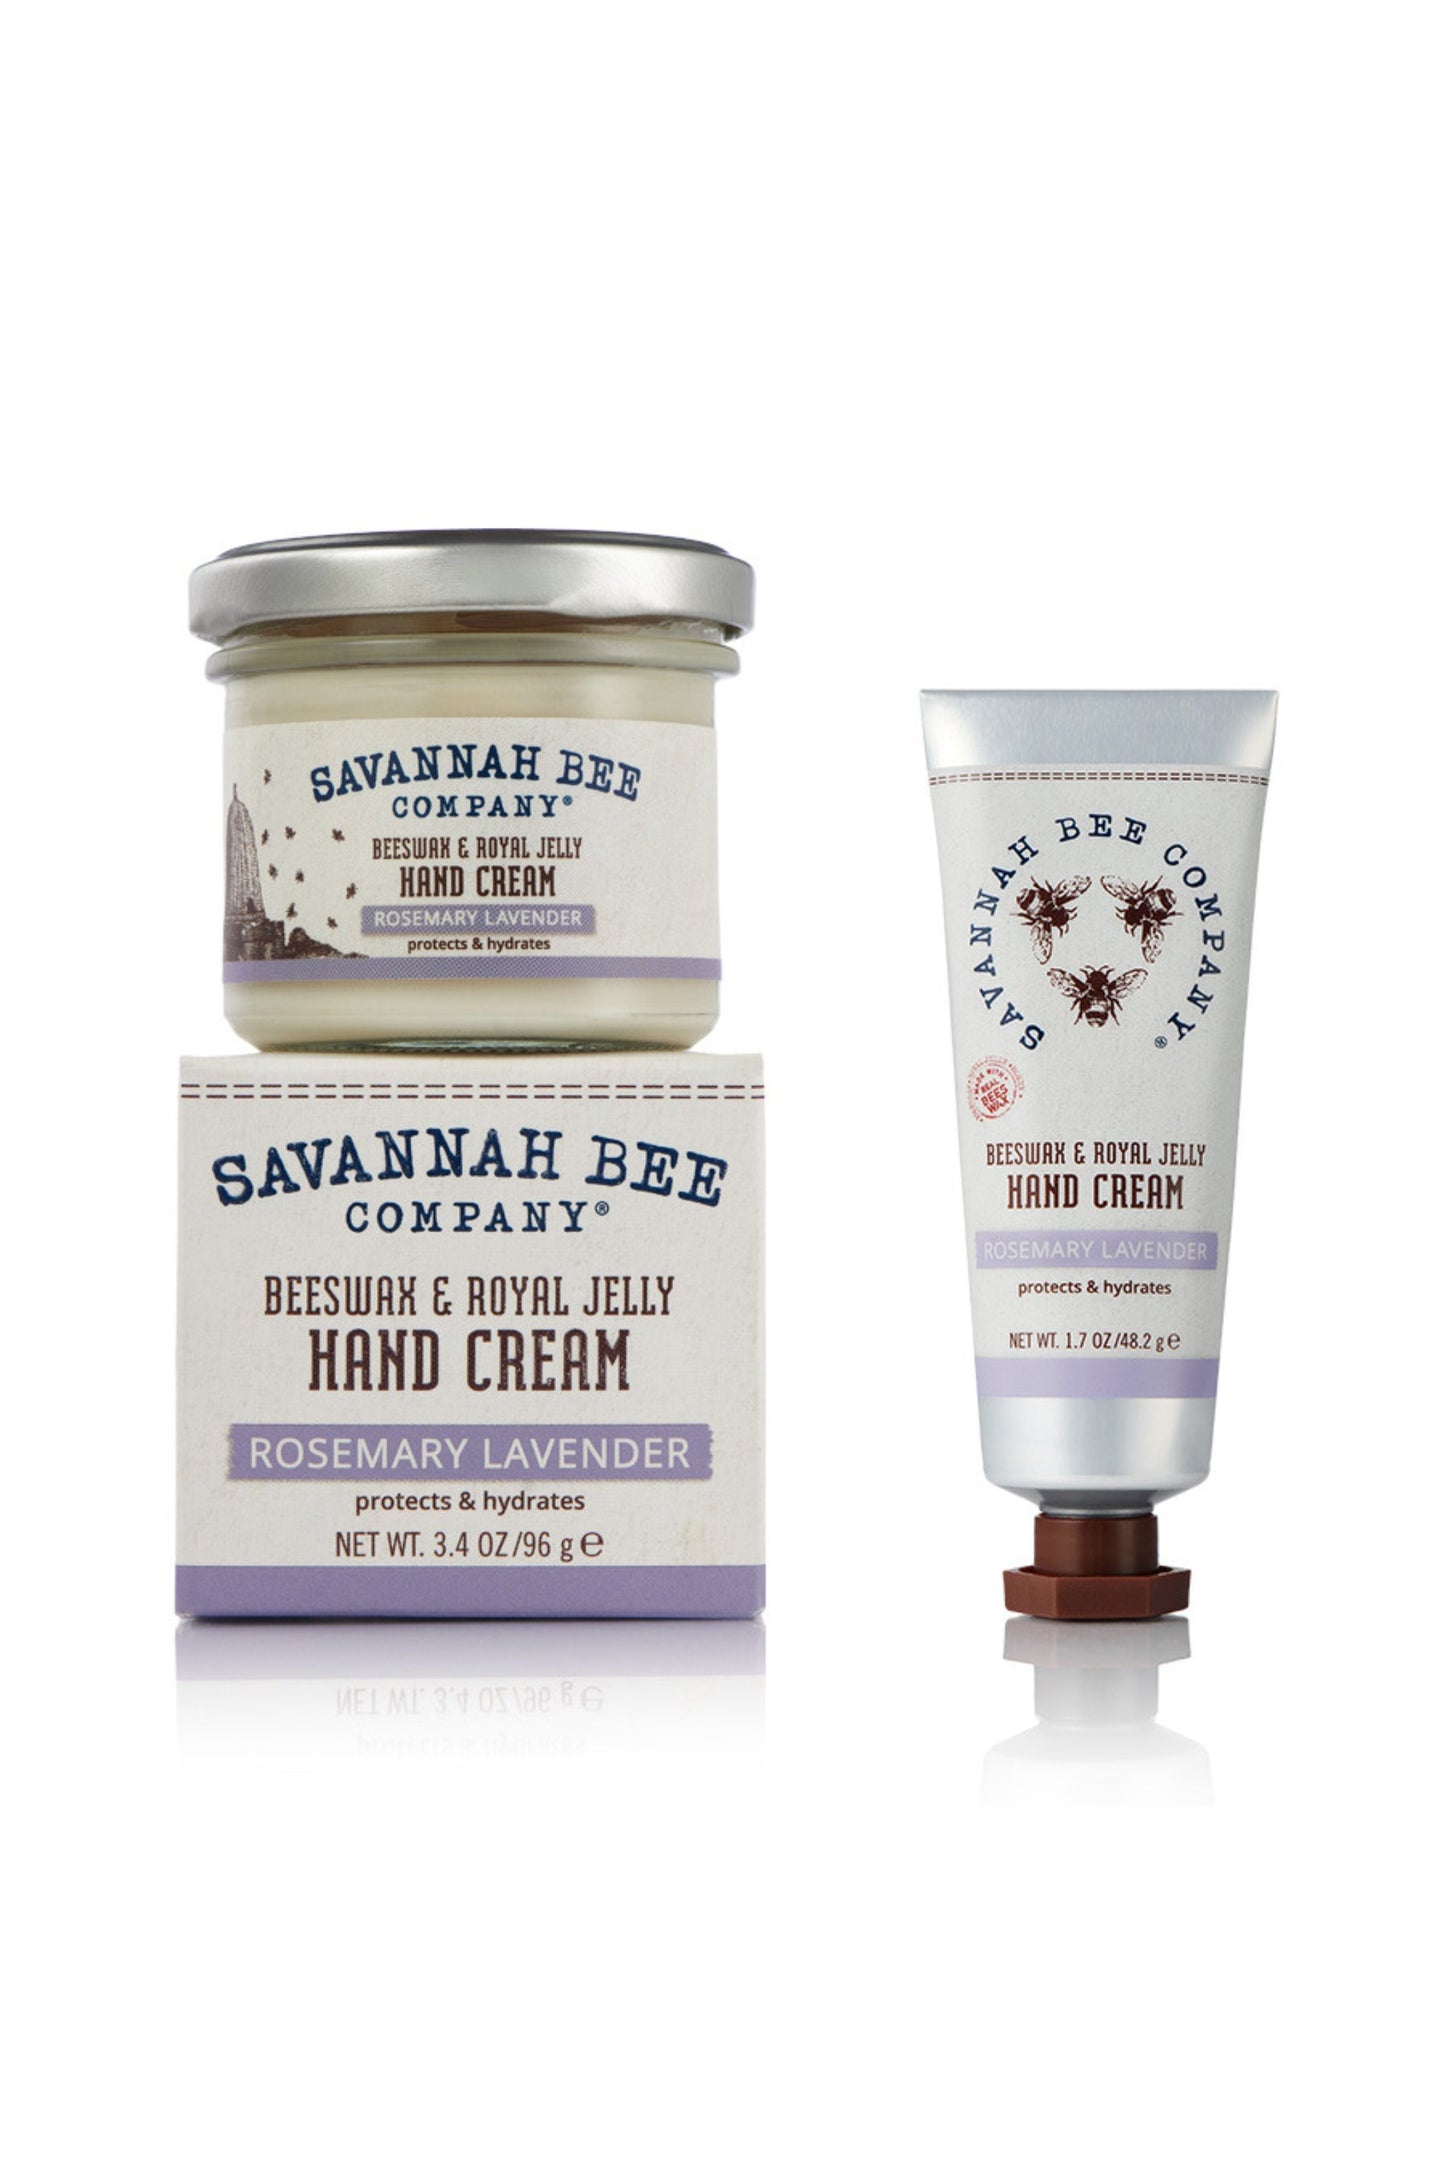 Rosemary Lavender Beeswax Royal Jelly Hand Cream in a Jar or Tube